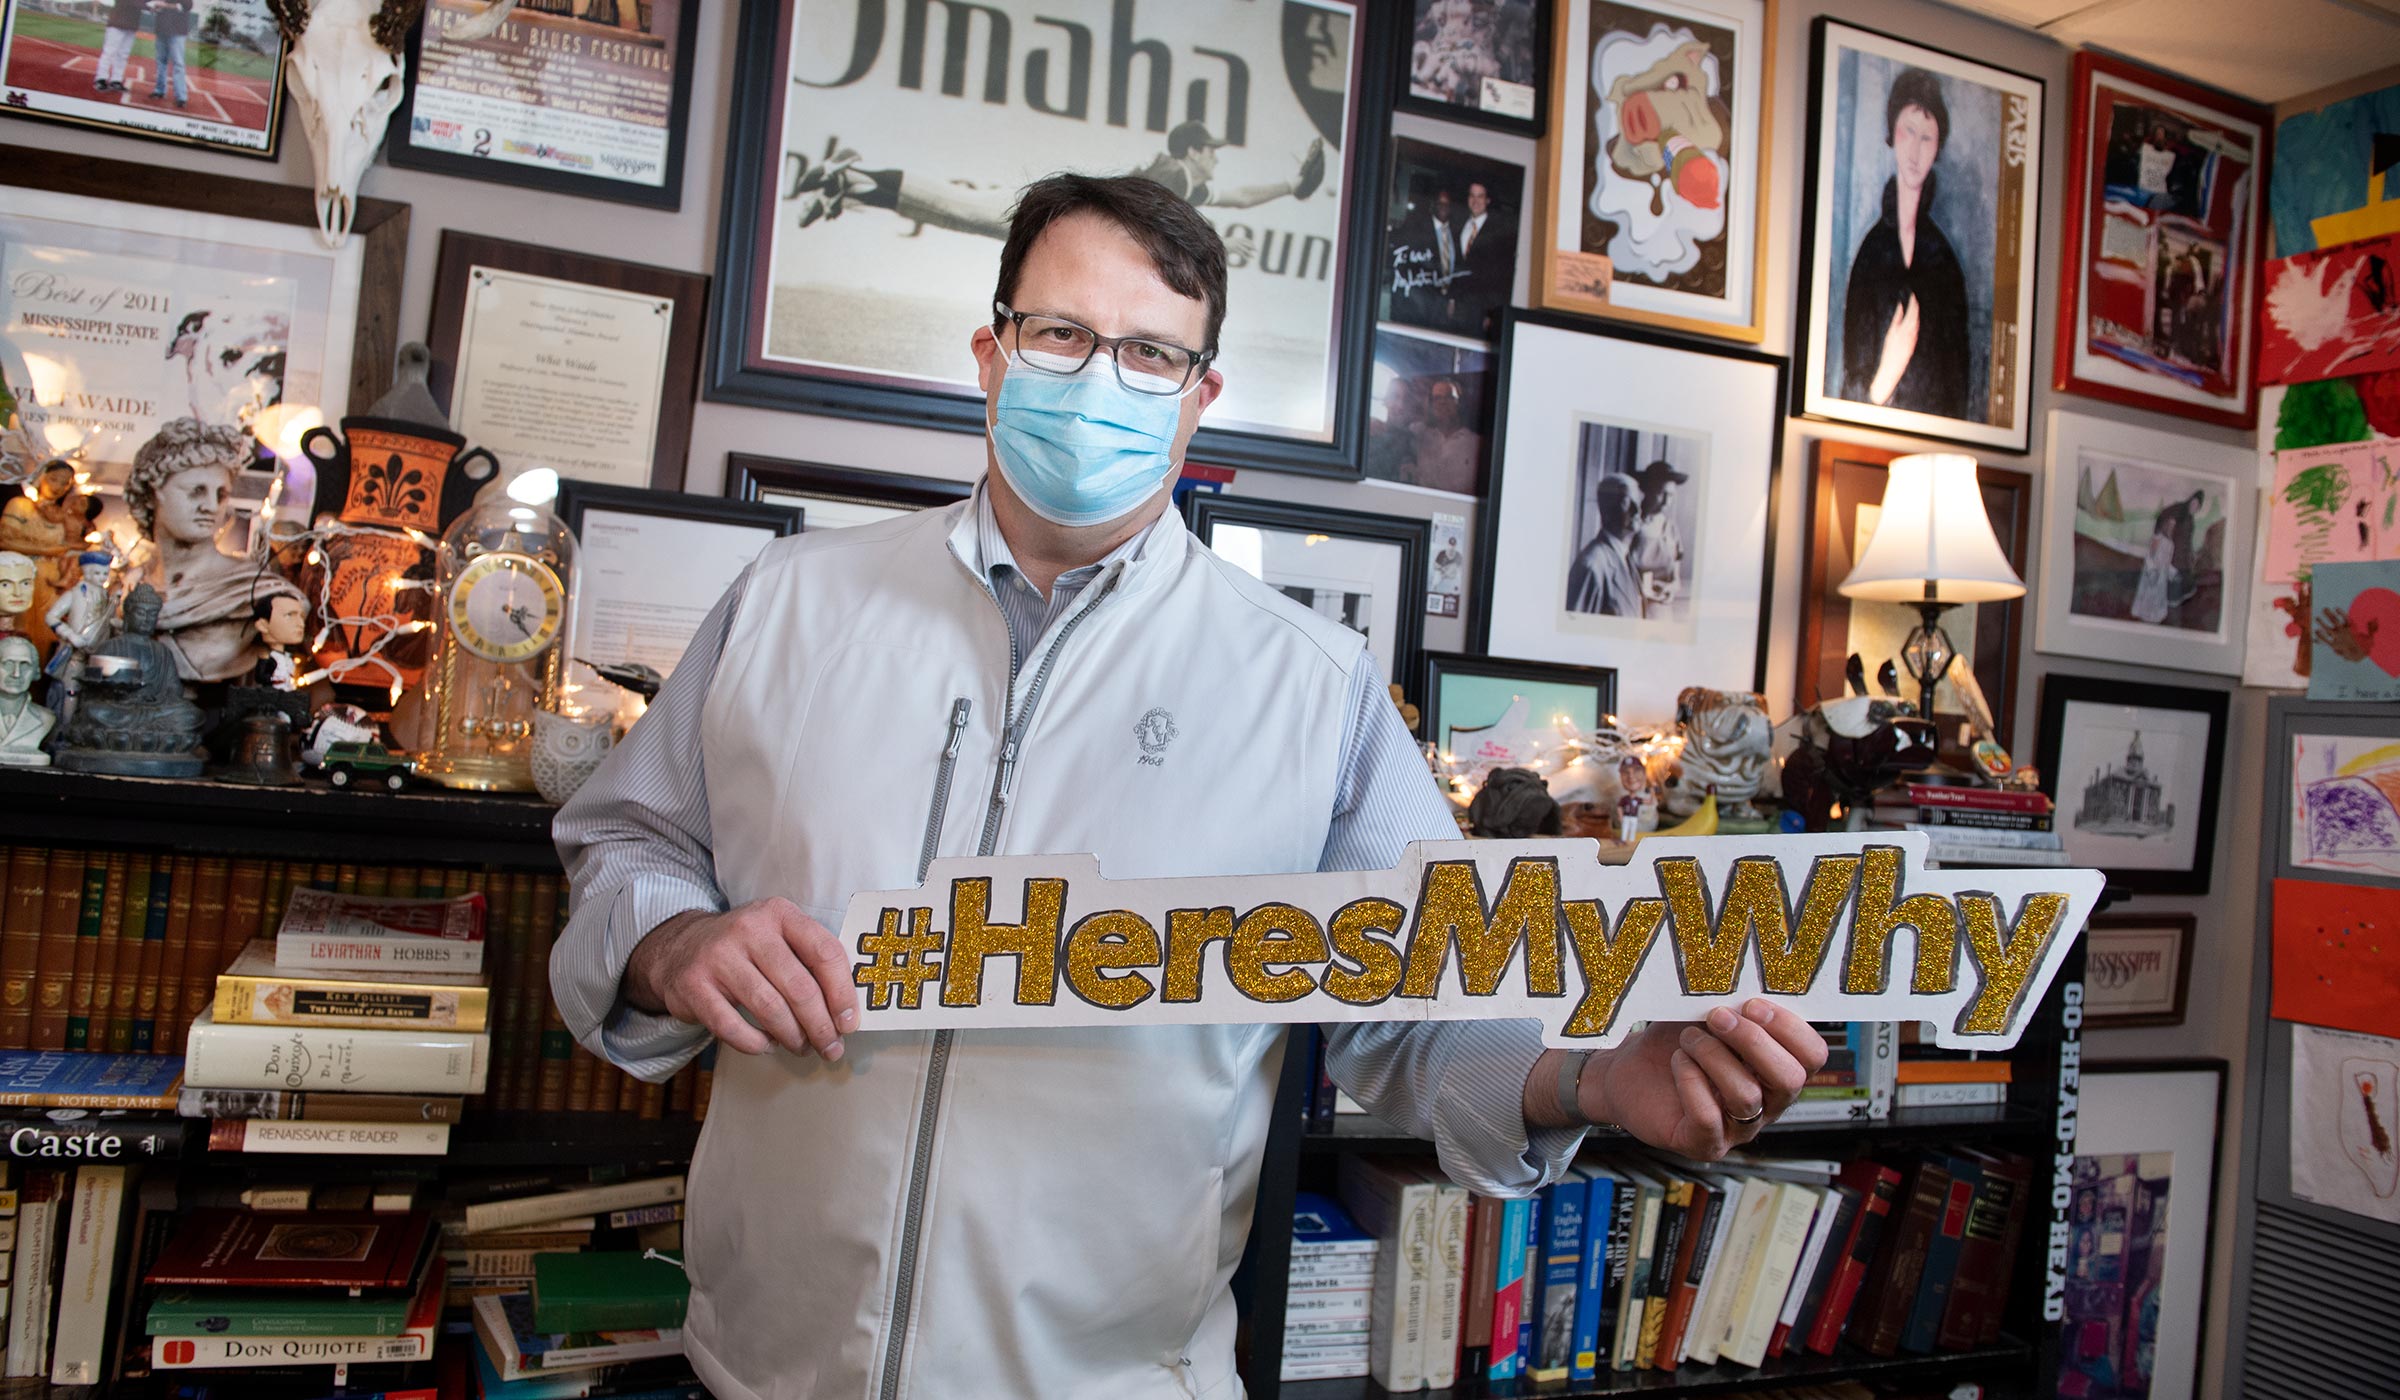 Poli Sci faculty member Whit Waide stands in his picture-covered office, wearing a facemask and holding a #HeresMyWhy sign.